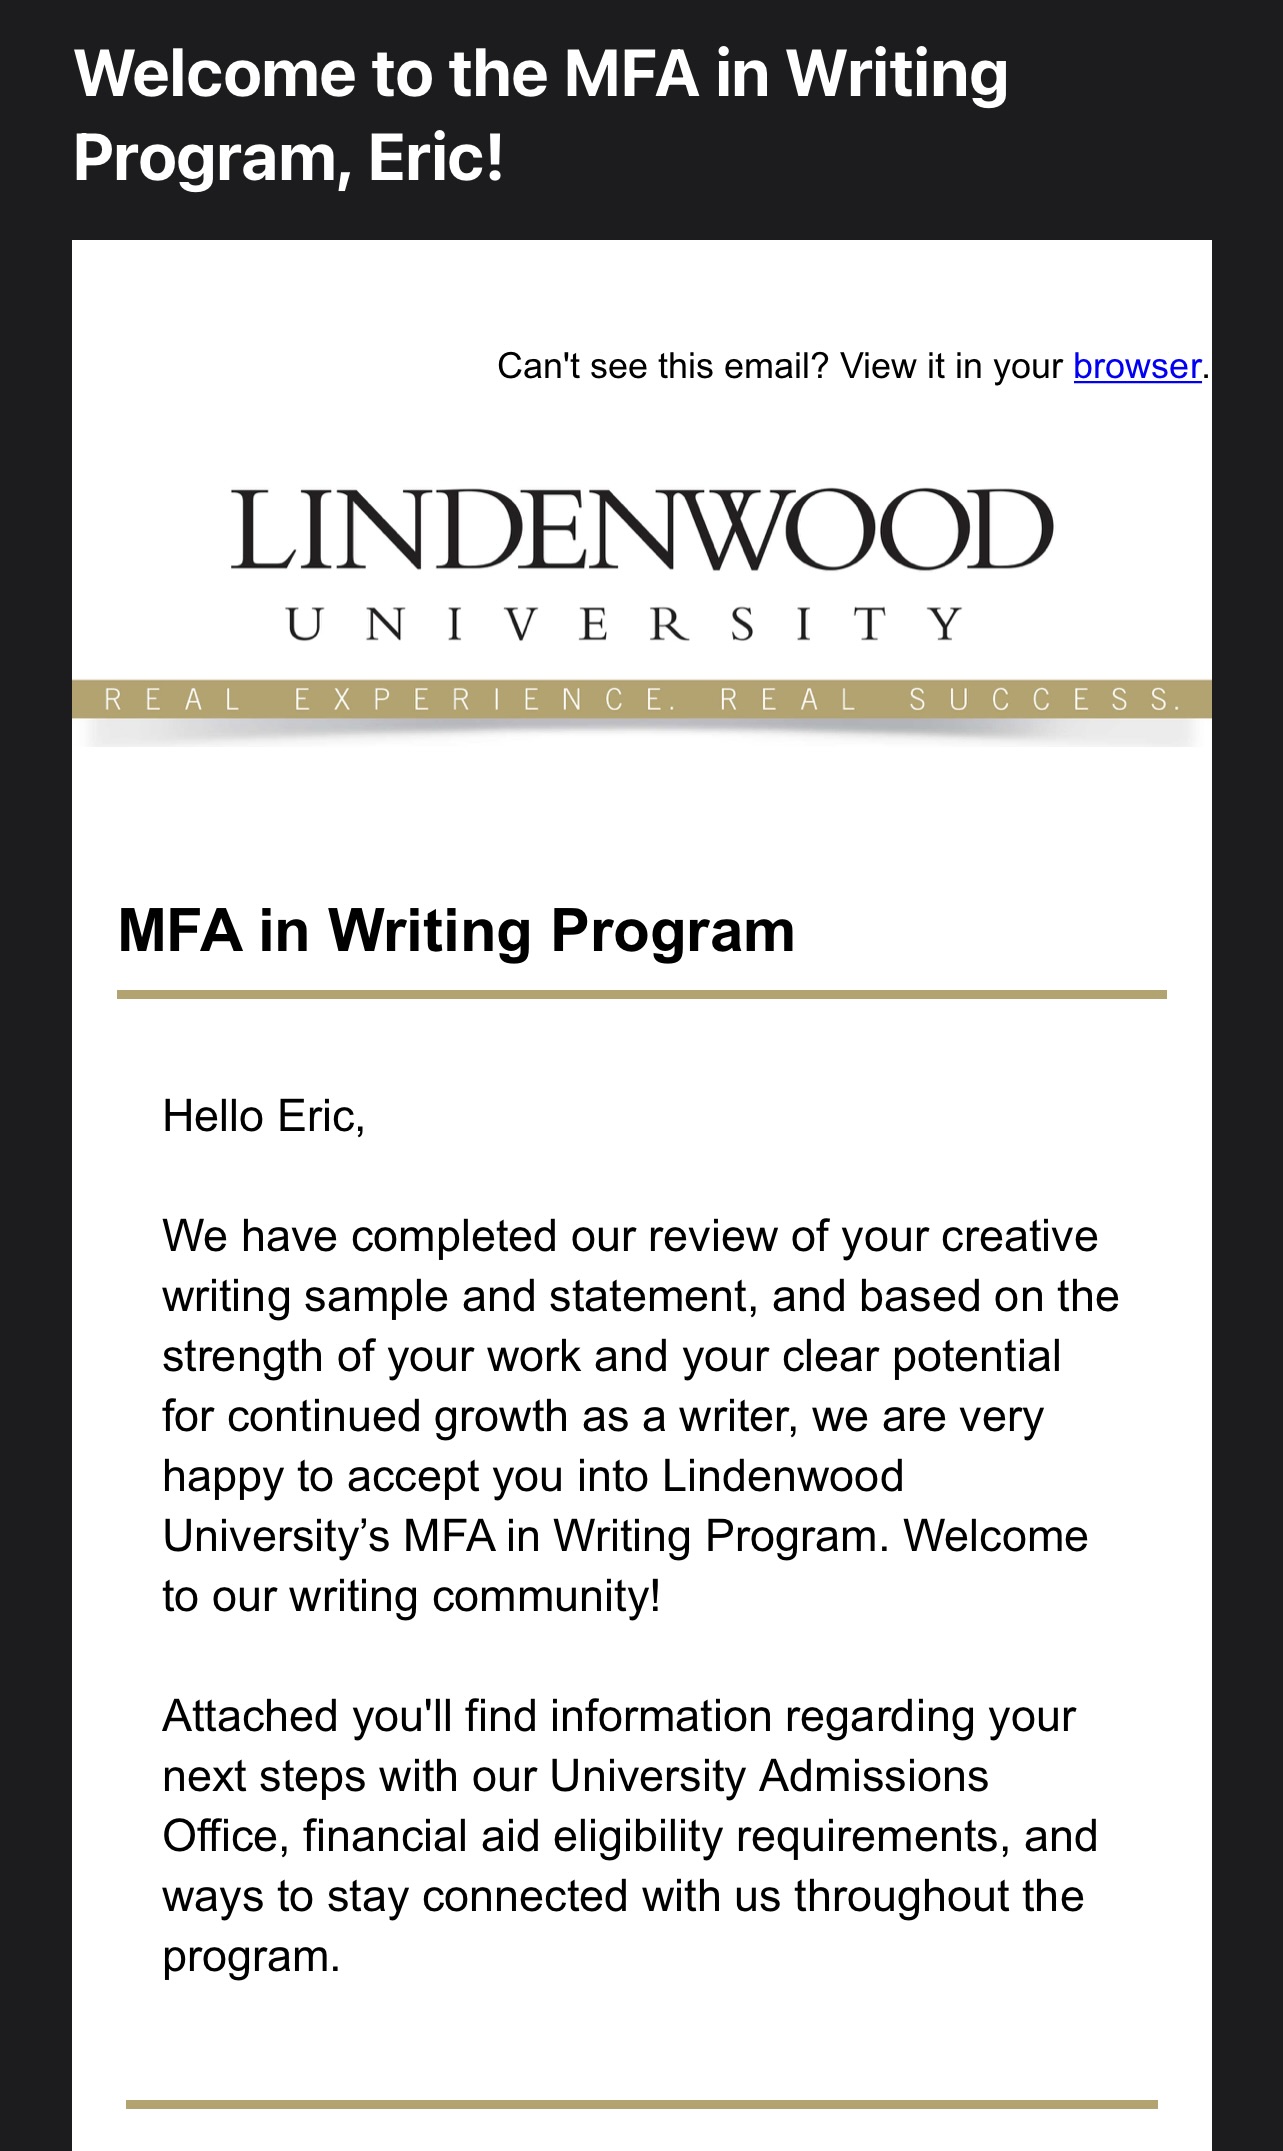 I Got Accepted Into An MFA Program for Creative Writing